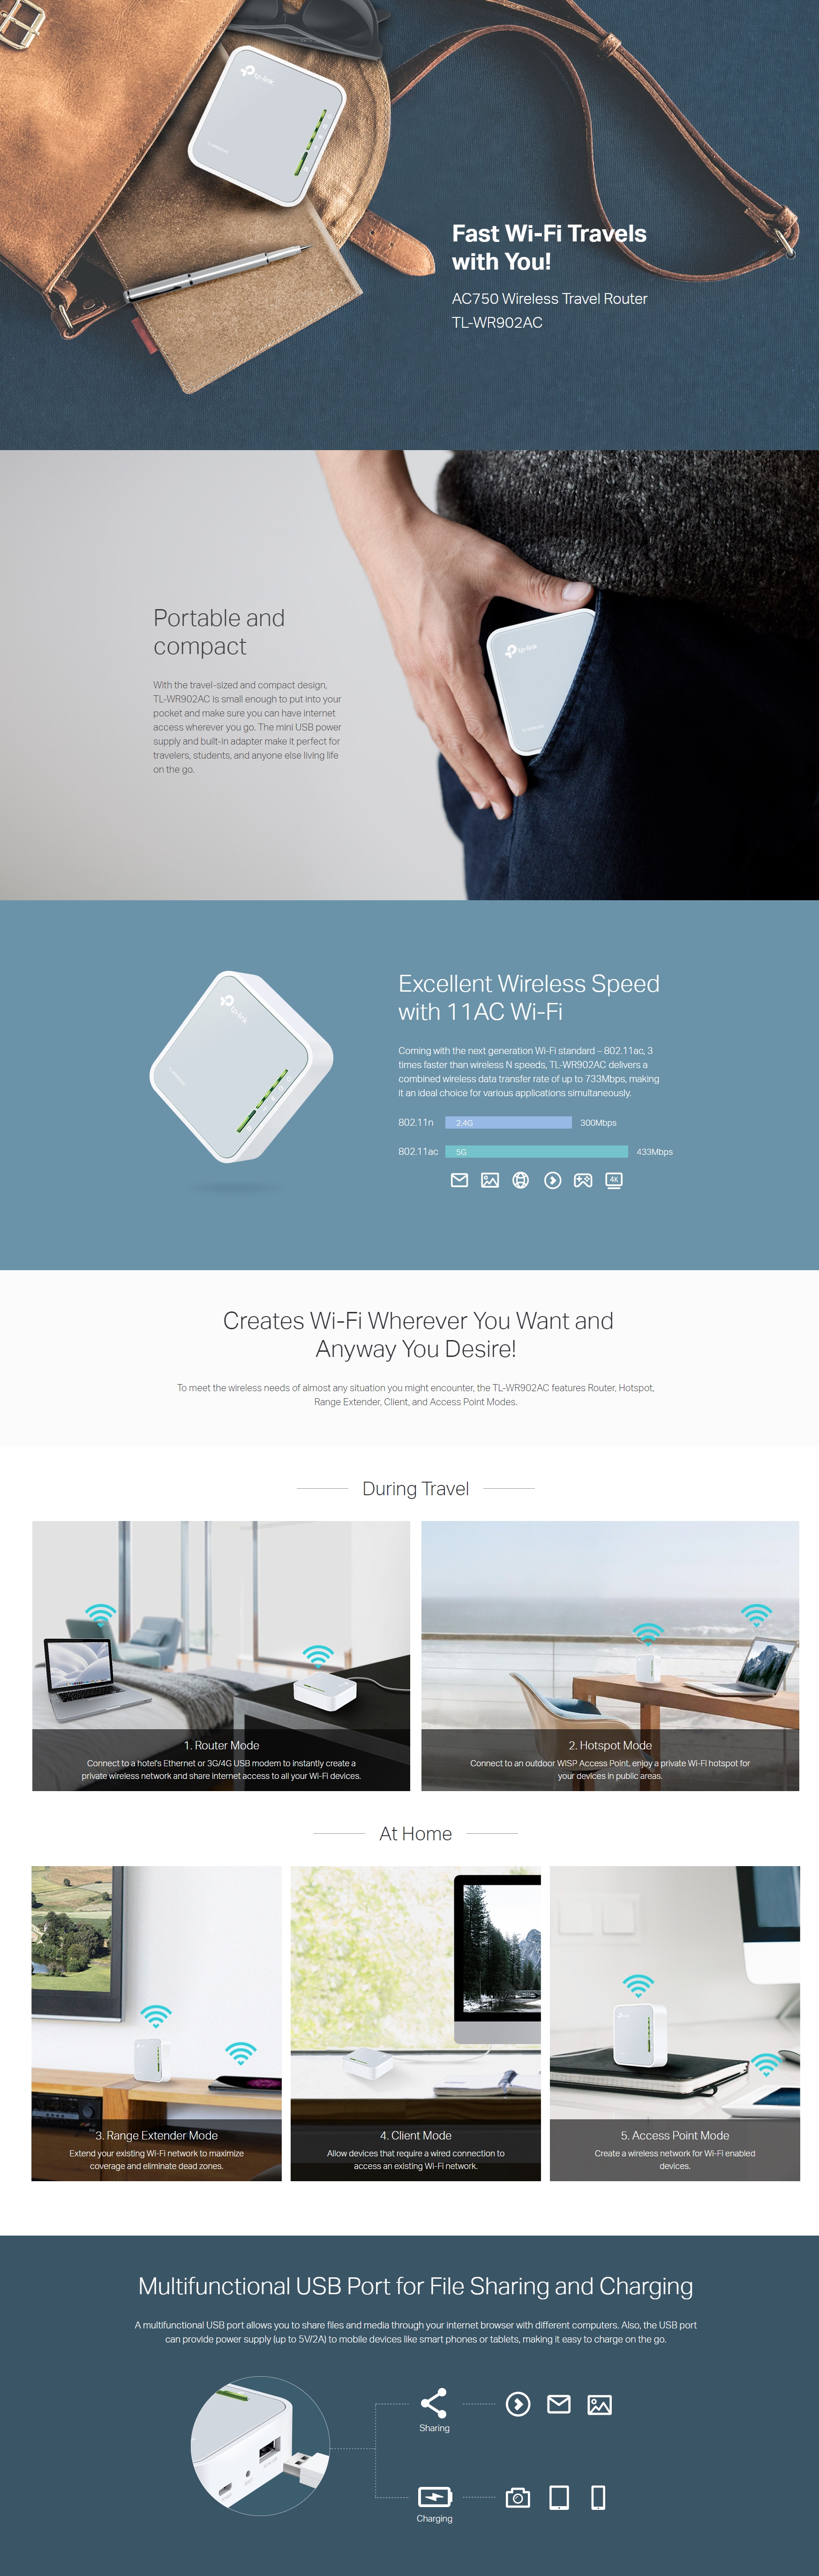 A large marketing image providing additional information about the product TP-Link WR902AC - AC750 Dual-Band Wi-Fi 5 Travel Router - Additional alt info not provided